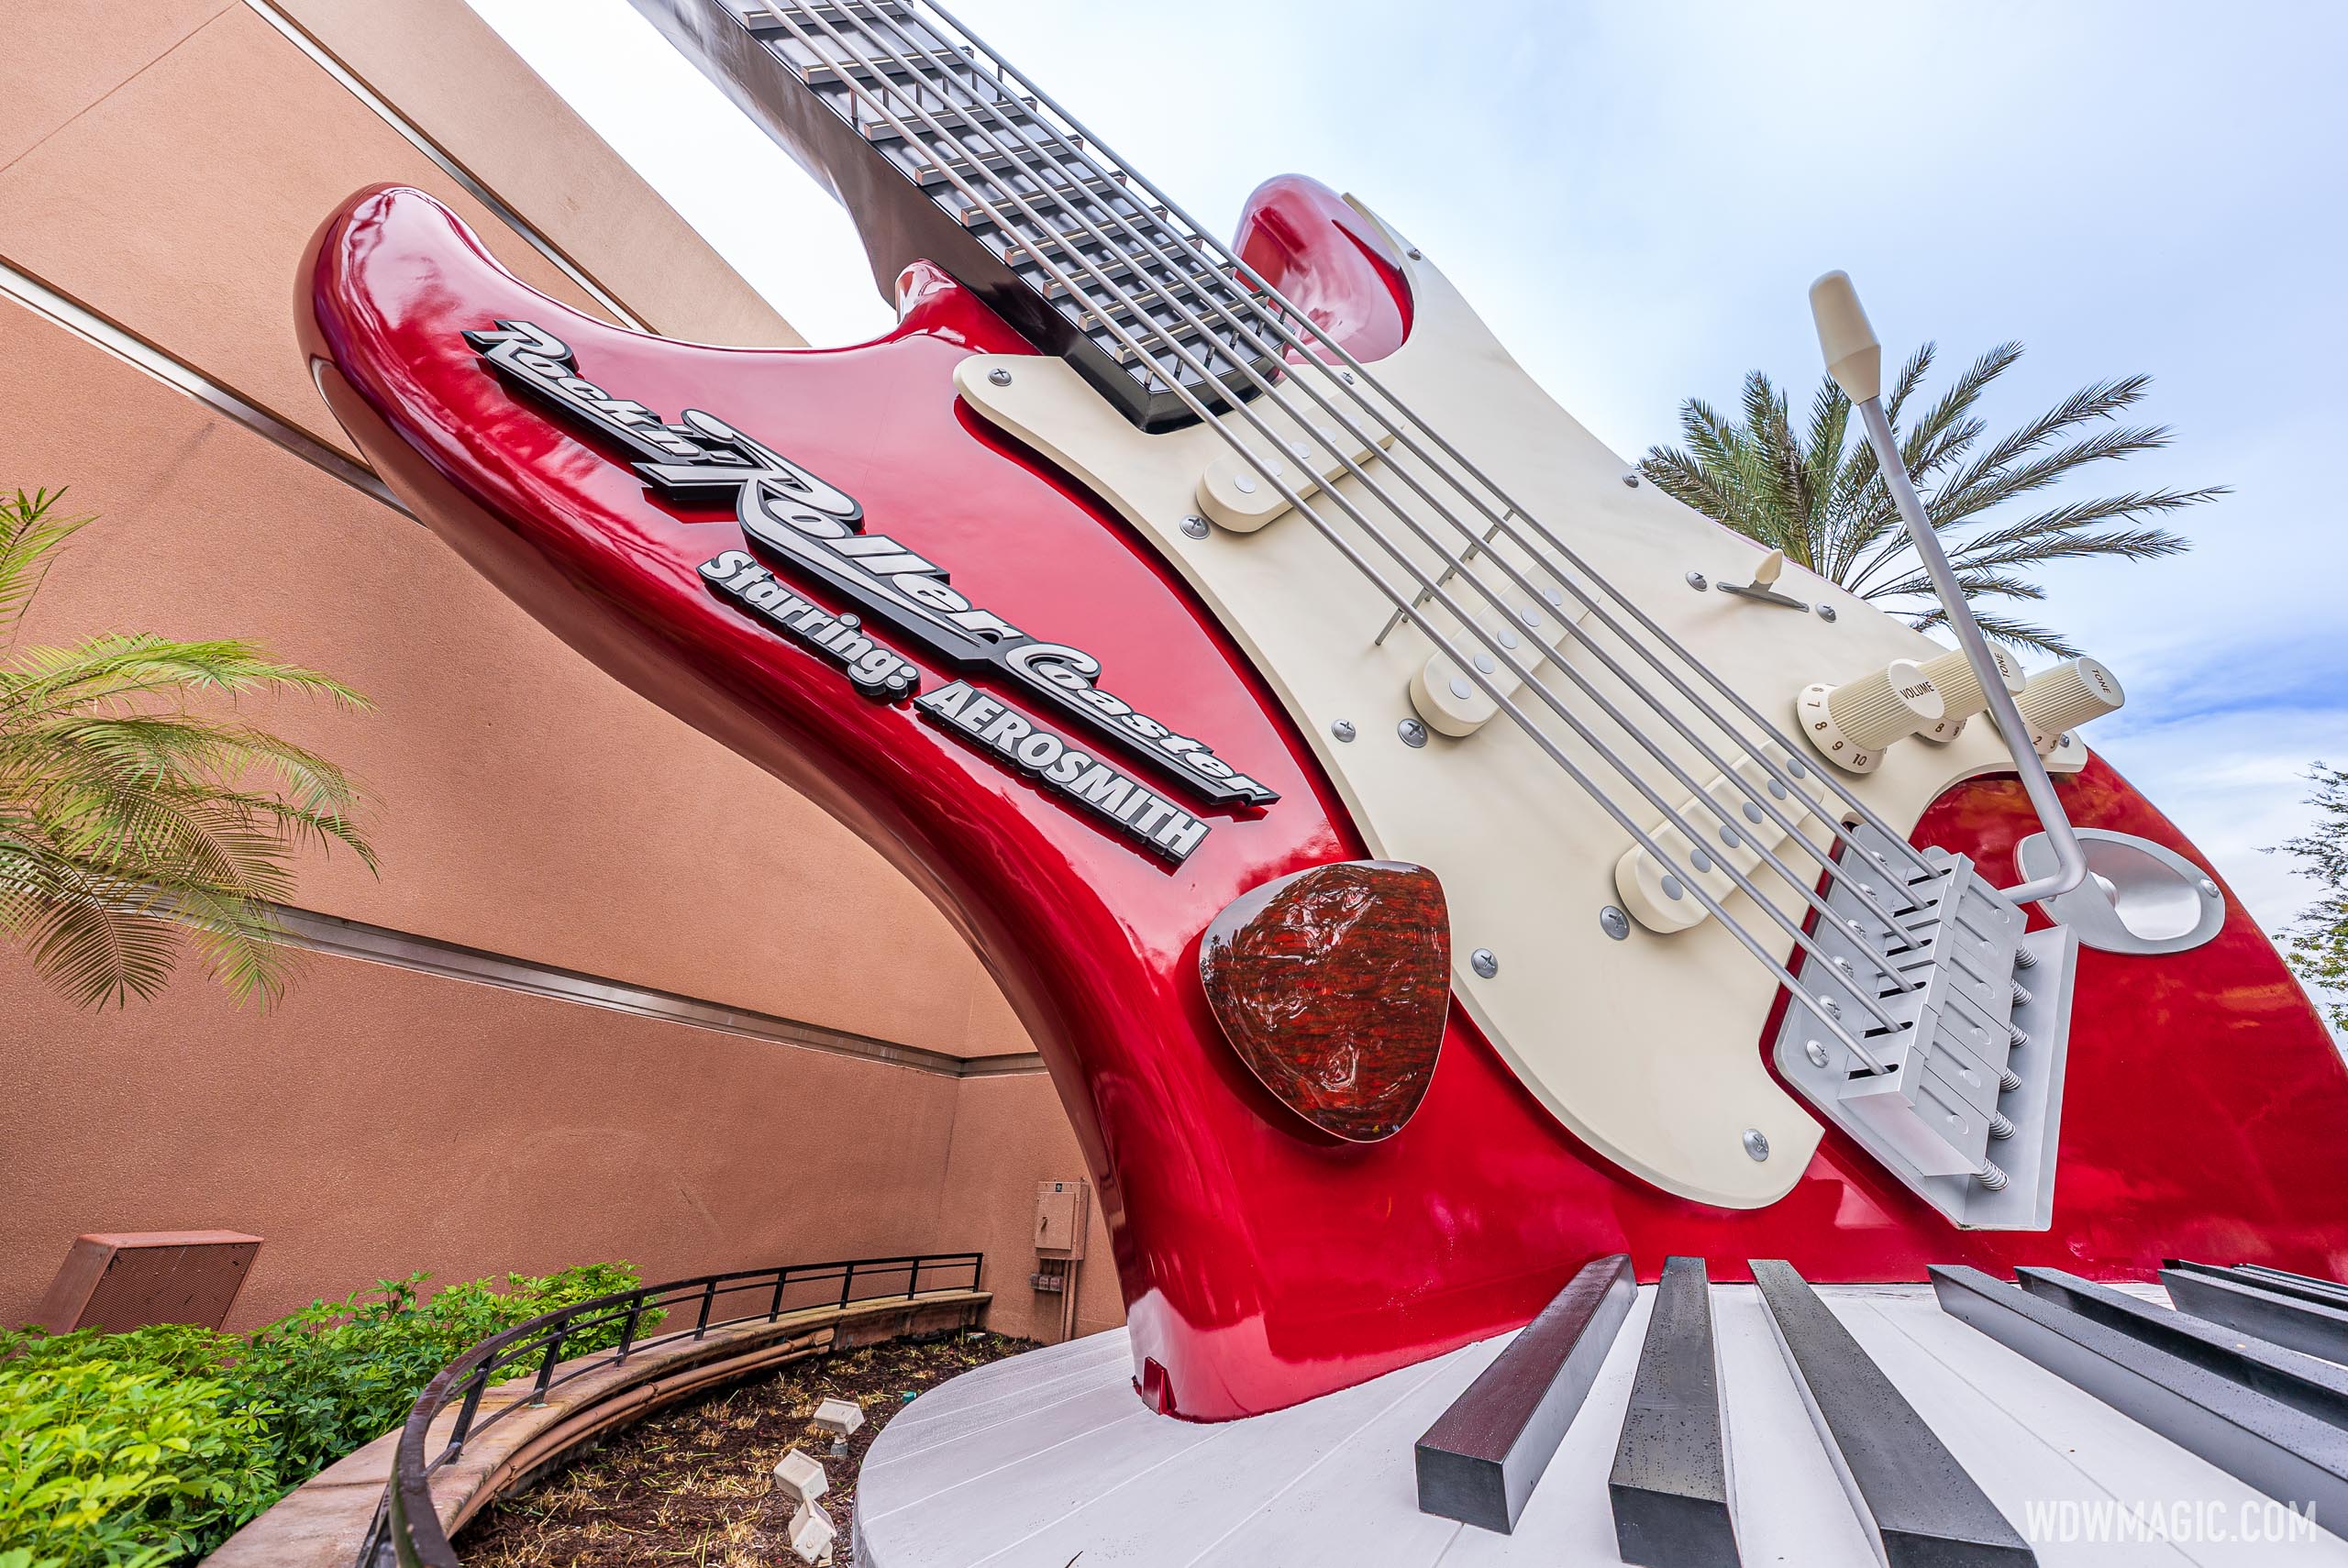 Signed Aerosmith Photo Still Missing, Wall Covered in Dust at Rock 'n' Roller  Coaster in Disney's Hollywood Studios - WDW News Today